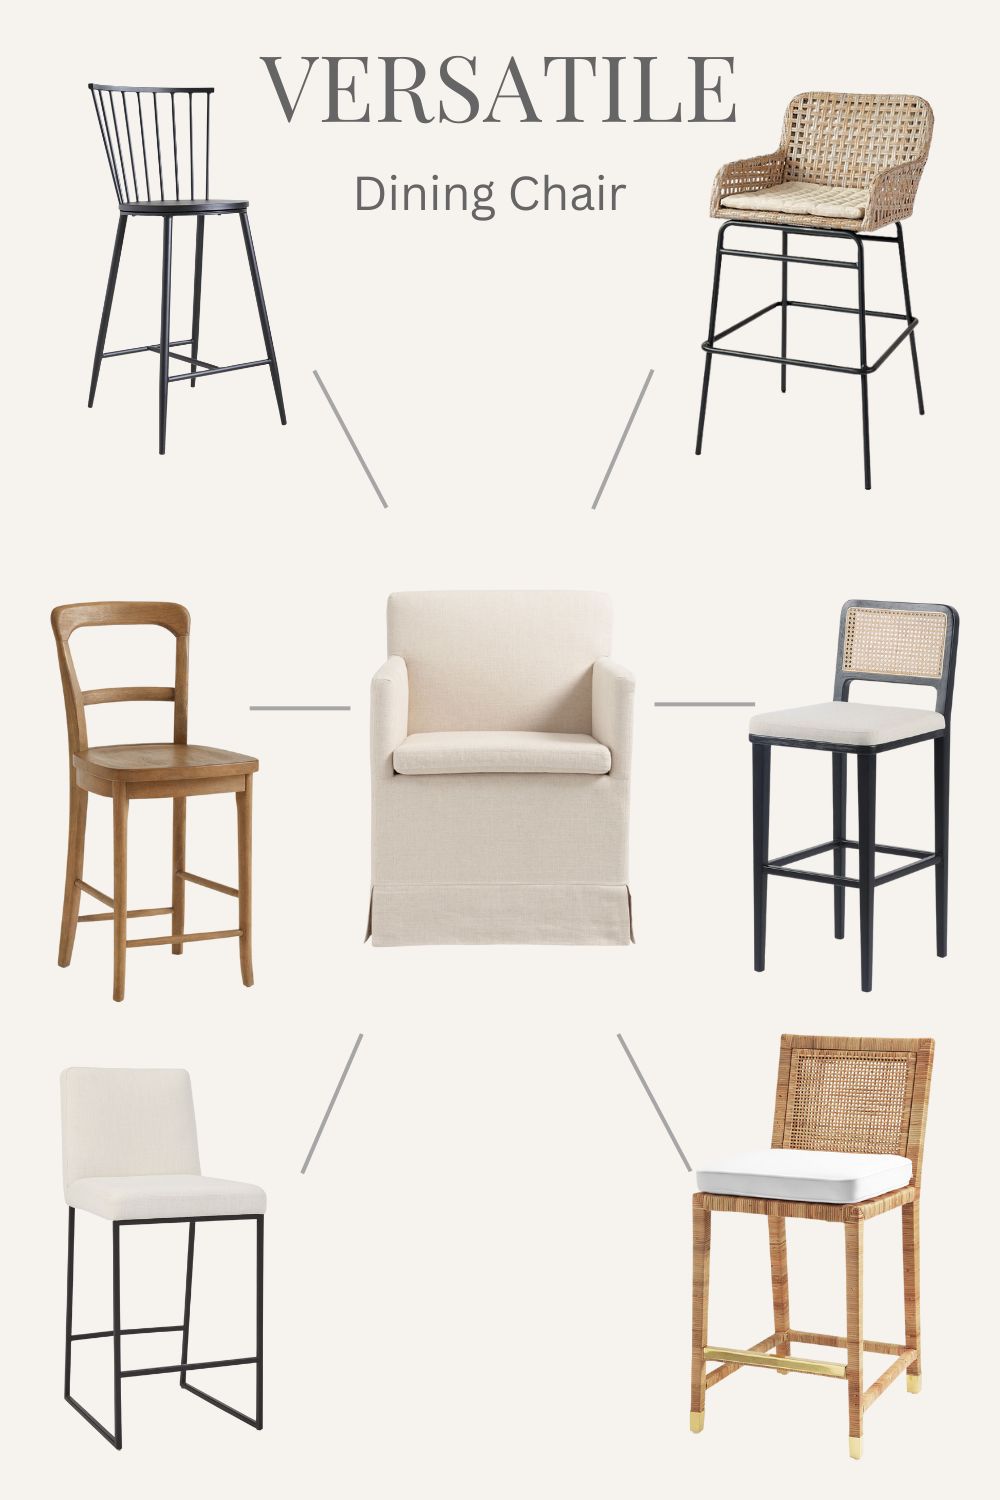 graphic showing how a linen dining chair can easily be paired with any style of color bar stool or counter stool